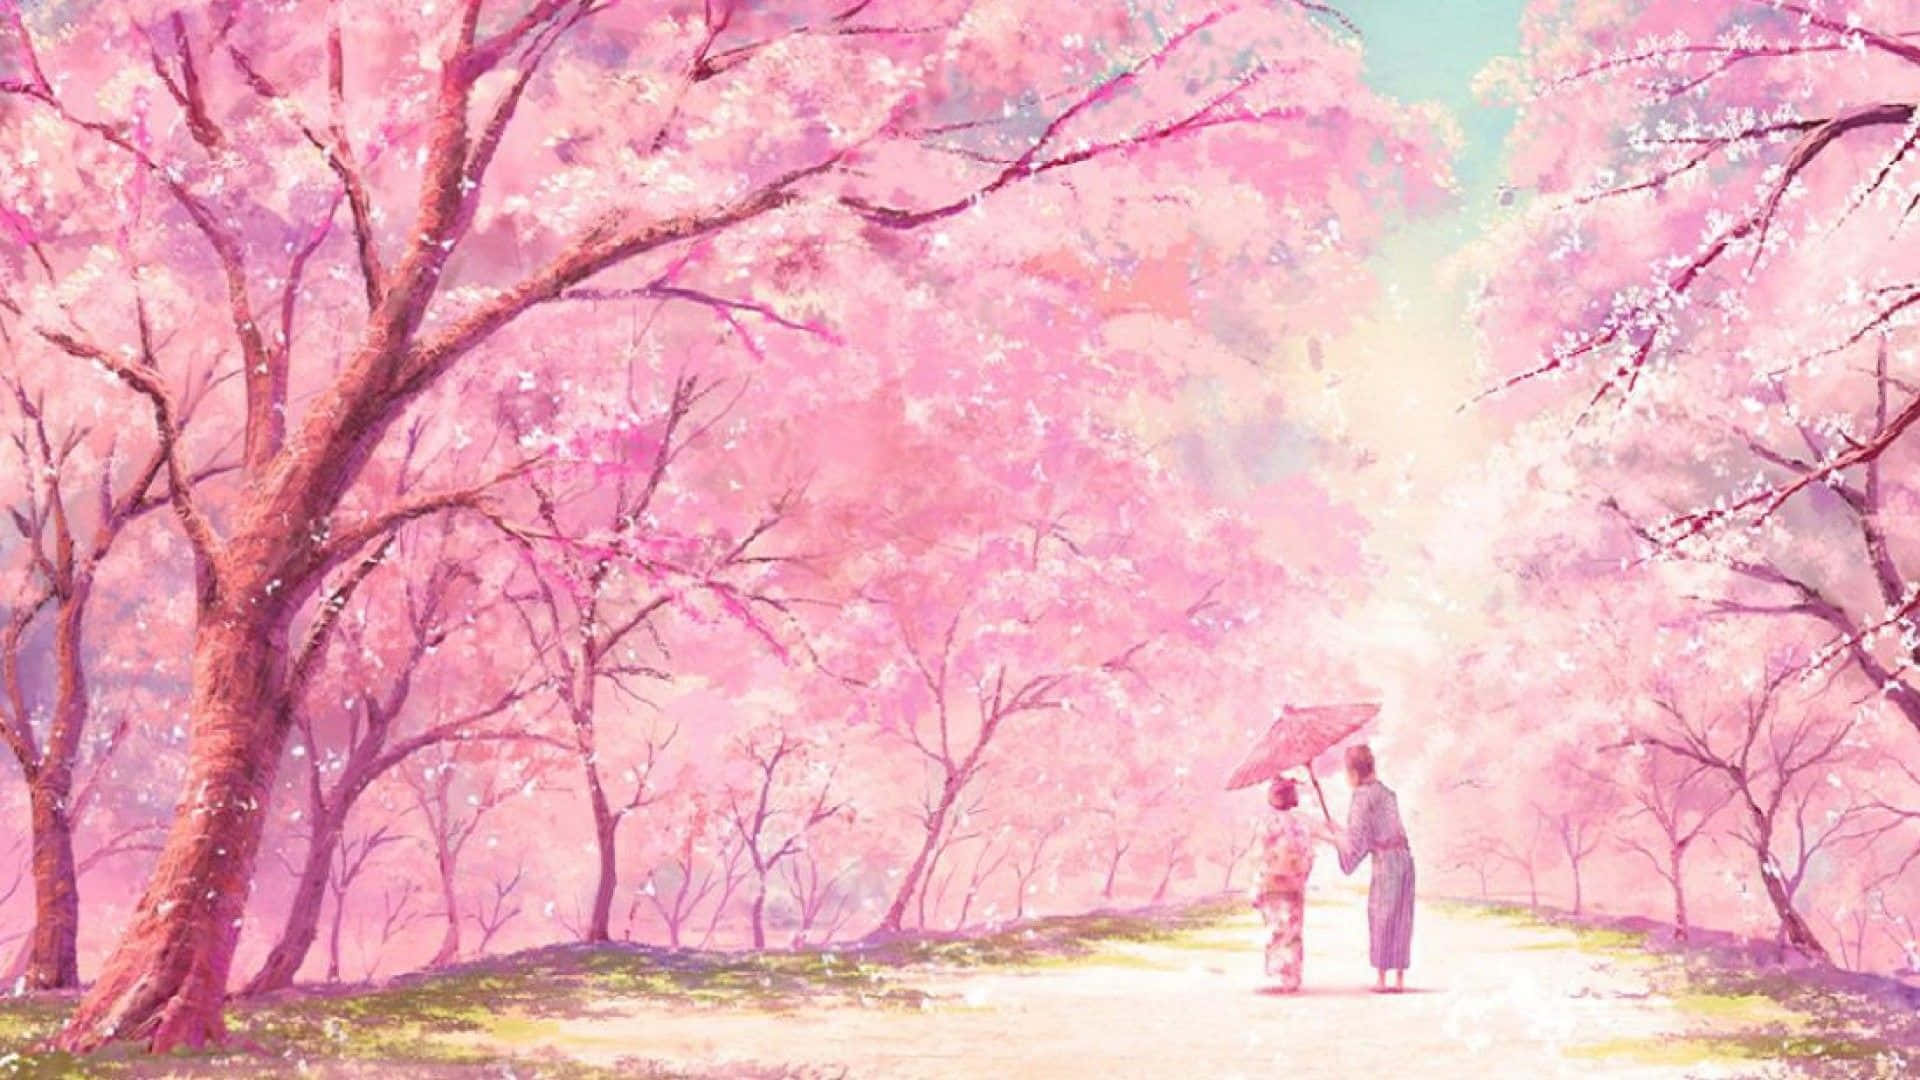 "Anime Is Perfectly In Tune With the Pink Aesthetic"